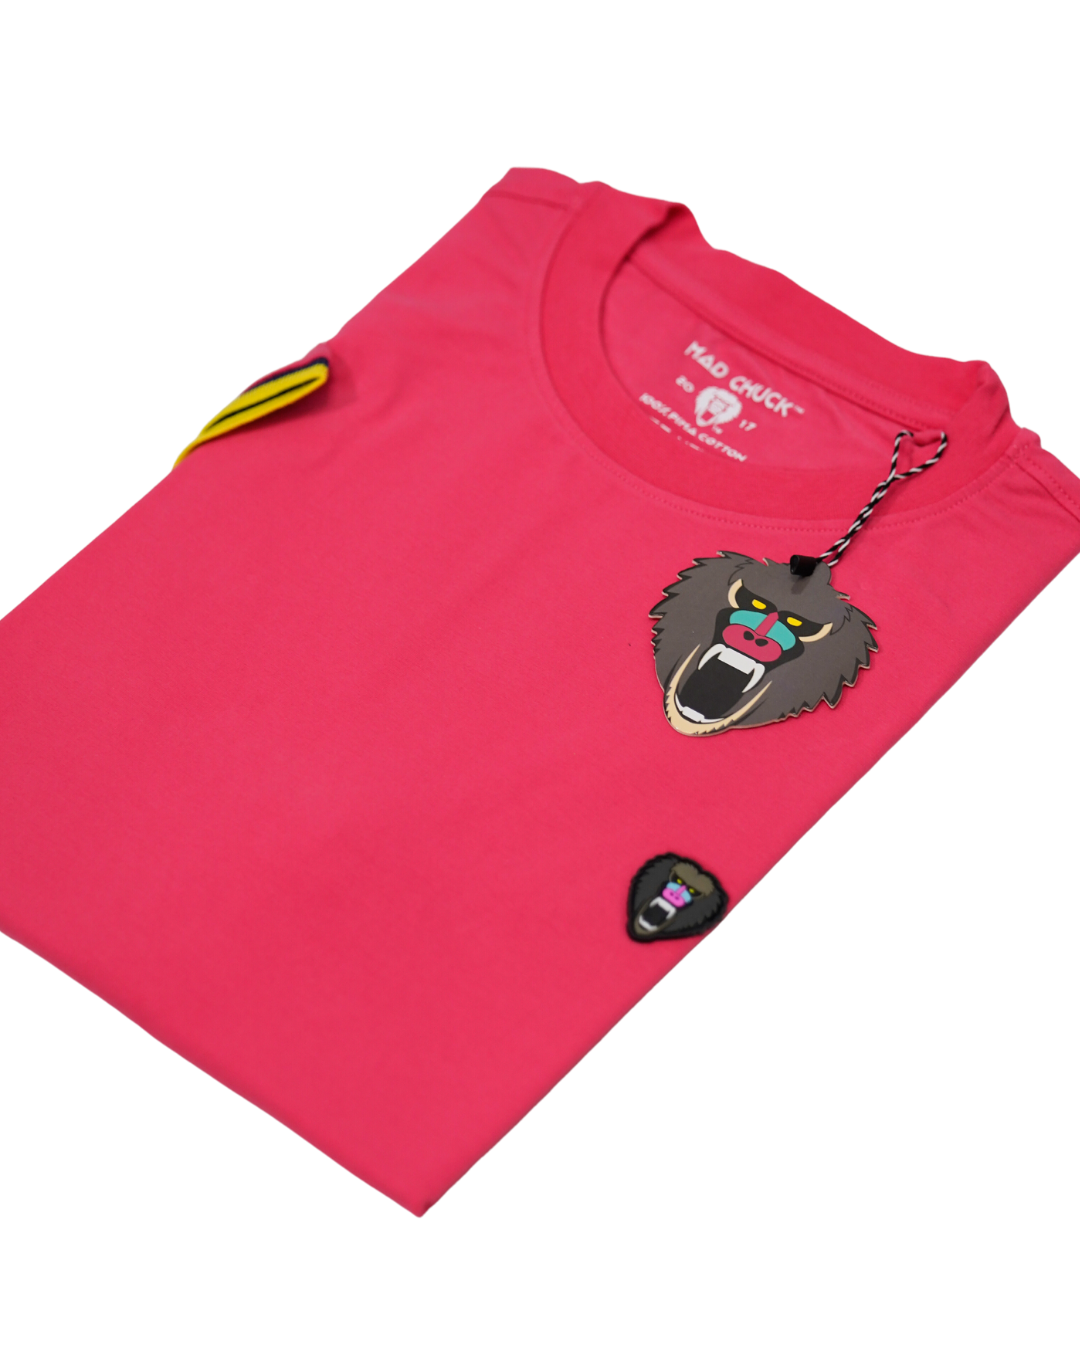 NEON CORAL CUFF RIBBED CREW NECK WITH NEW RUBBER PATCH - Mad Chuck™